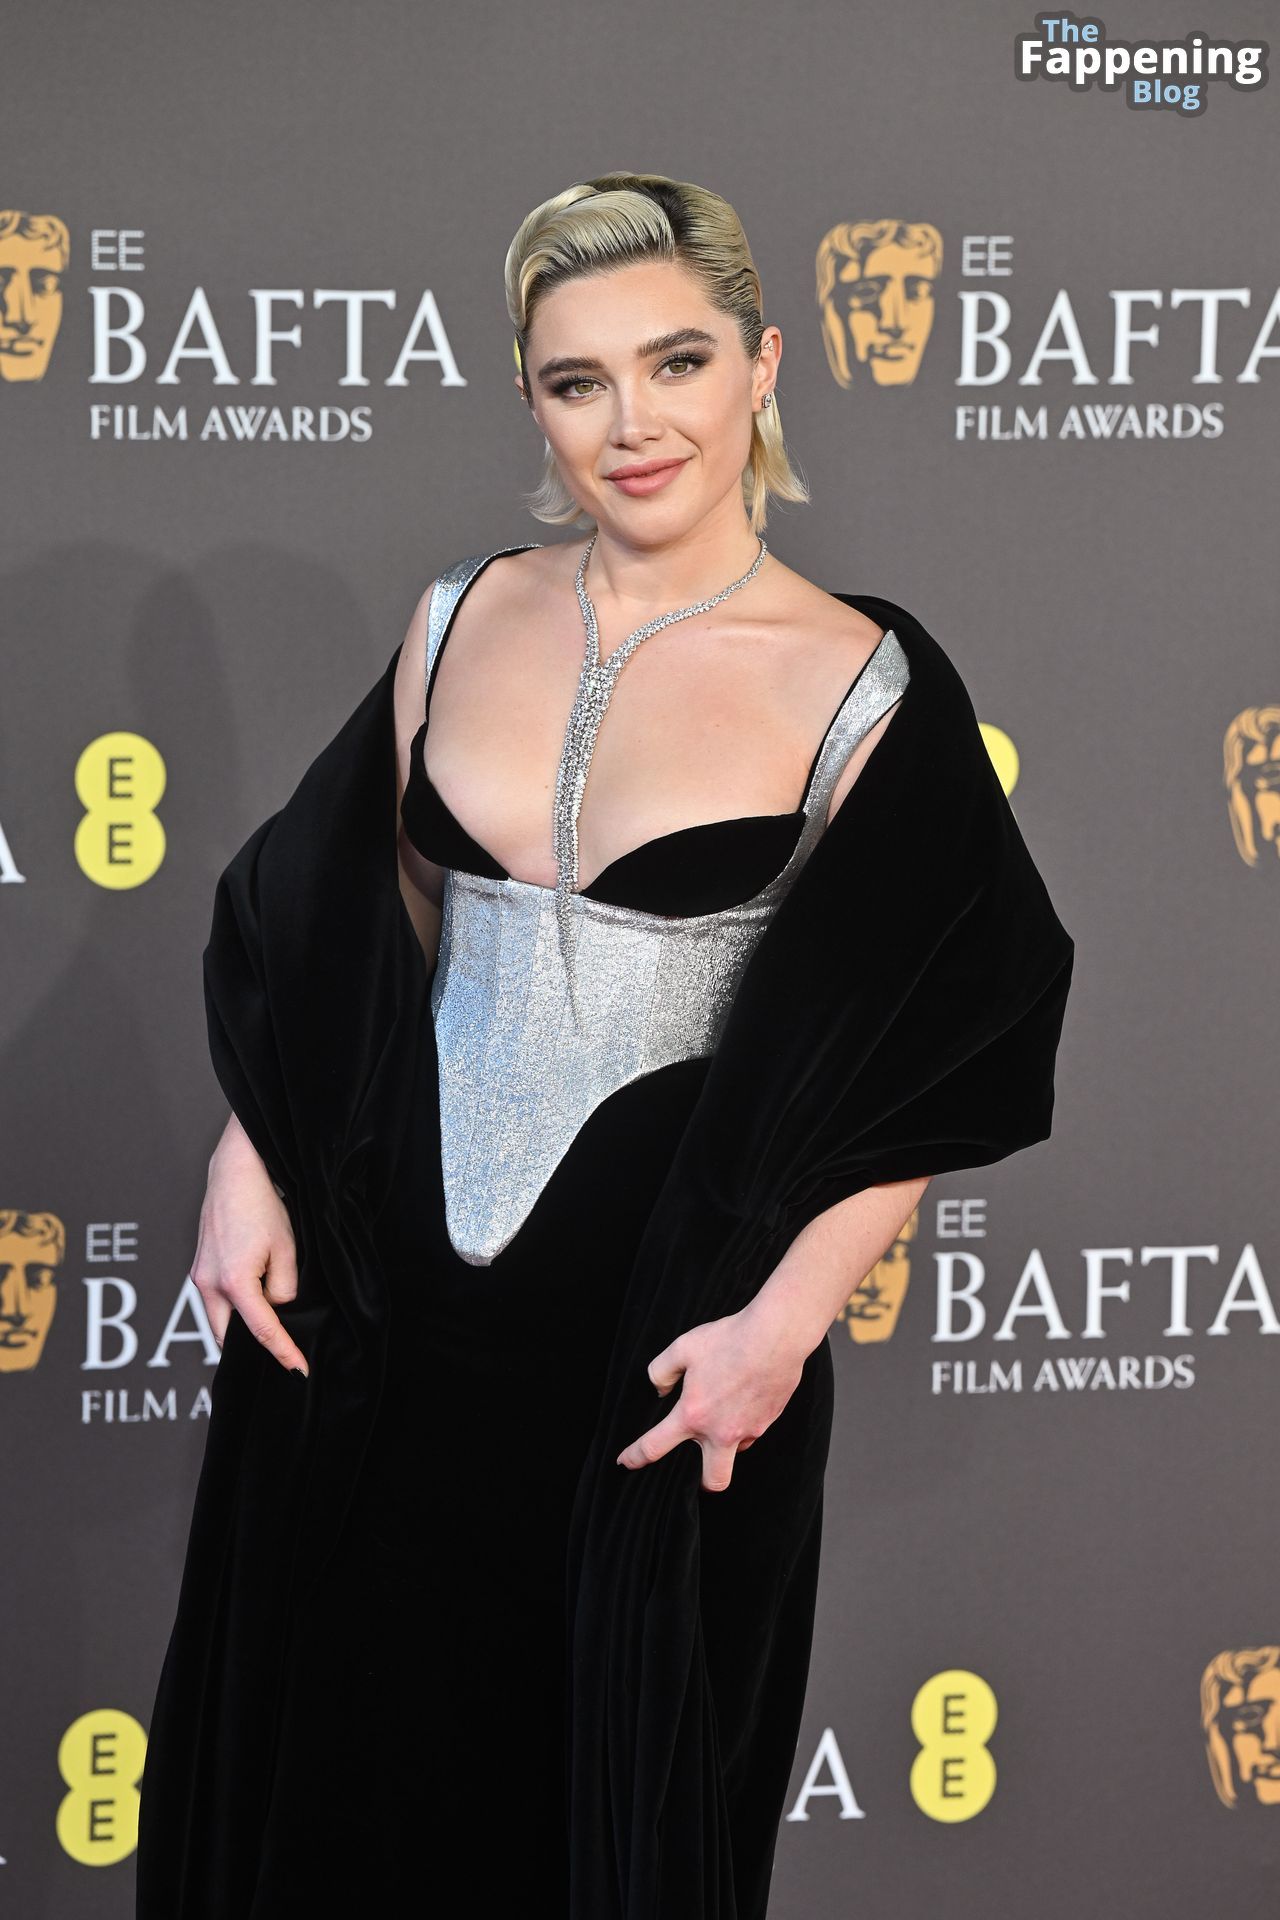 Florence-Pugh-Sexy-53-The-Fappening-Blog-1.jpg